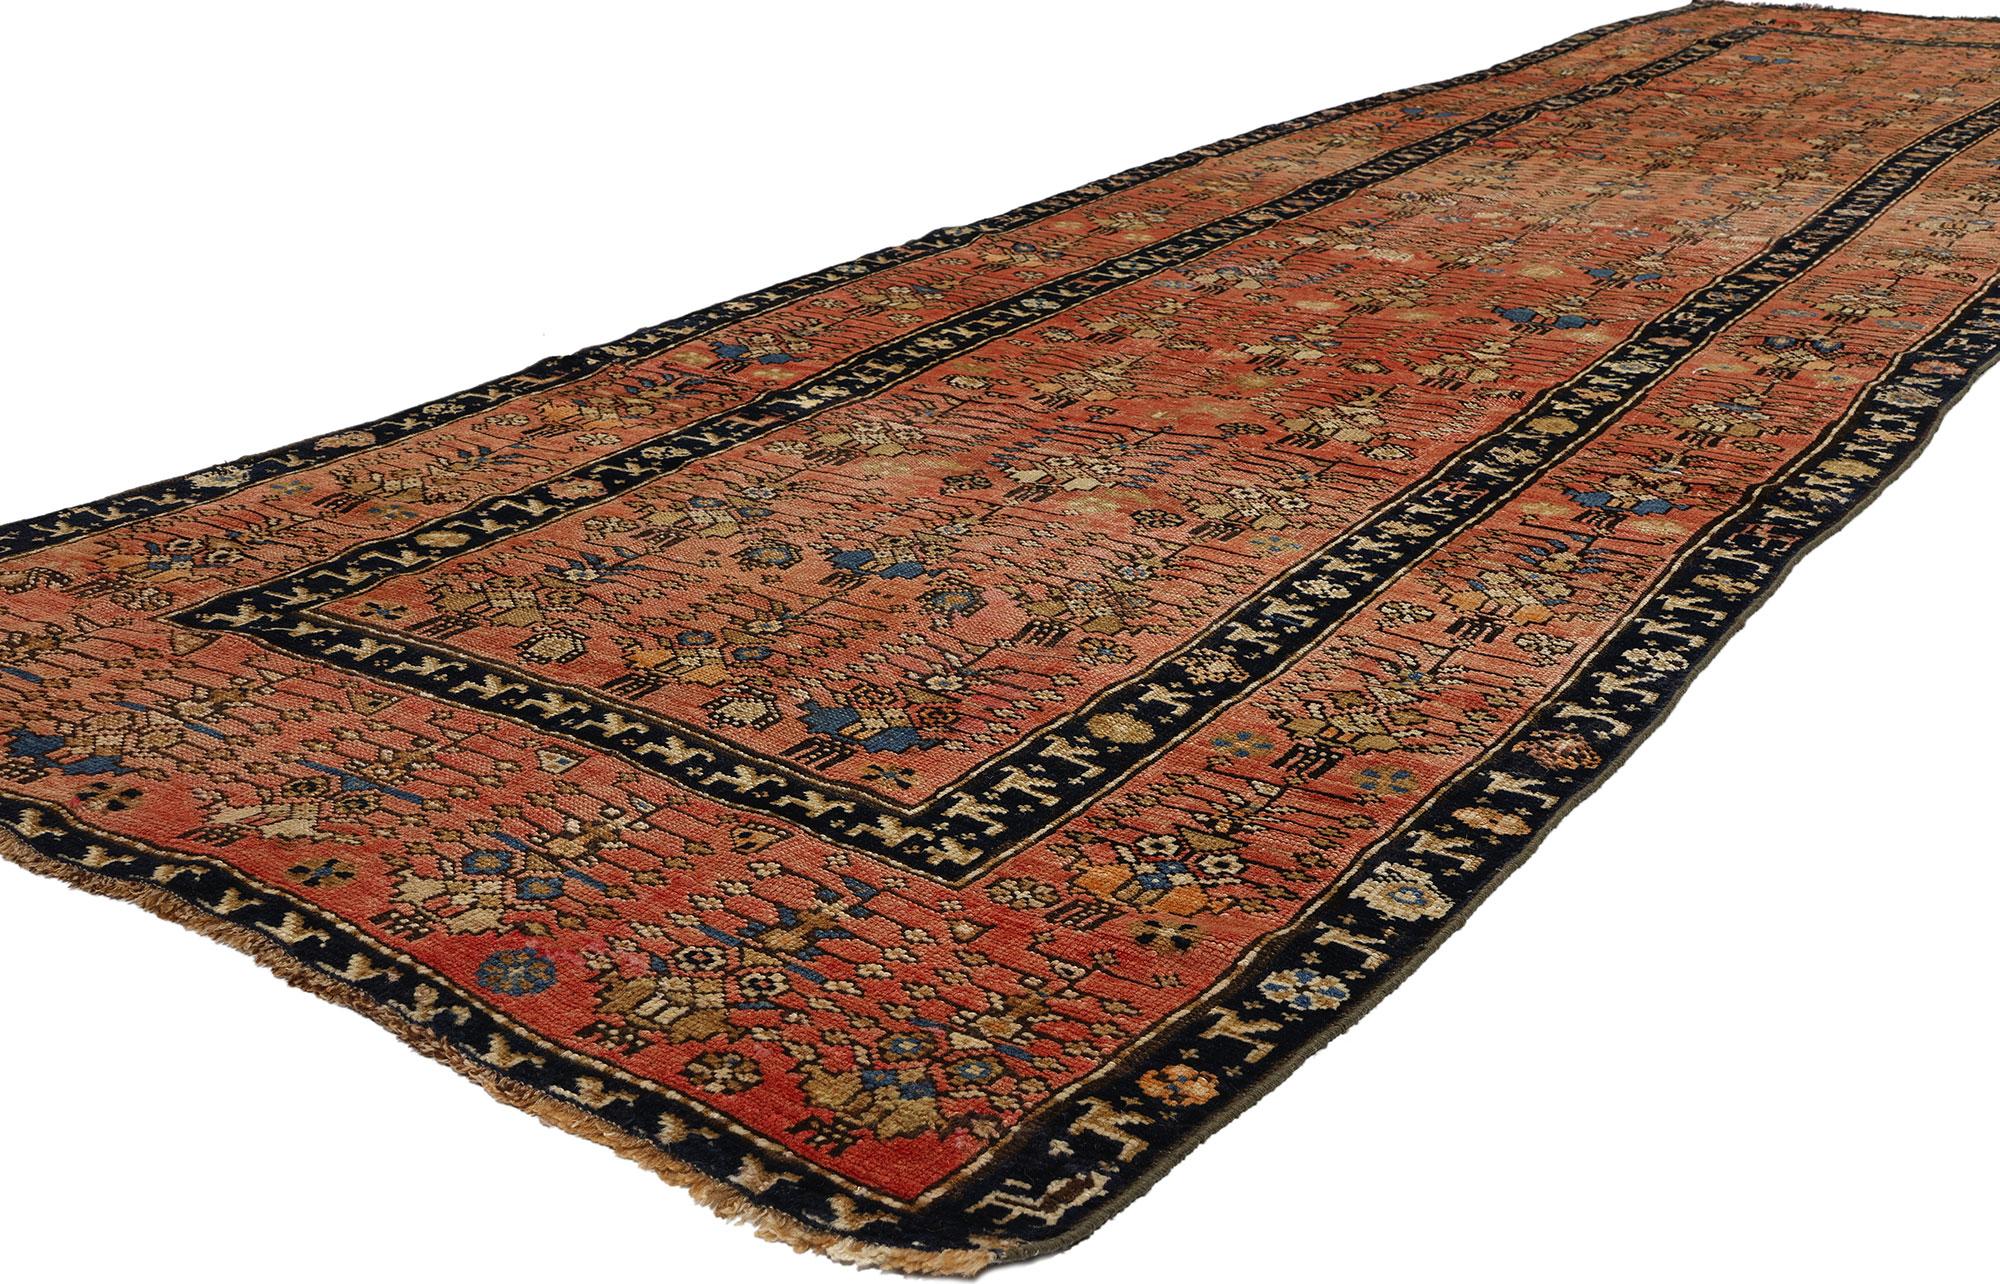 53878 Antique Caucasian Karabagh Rug Runner, 03'09 x 14'01. Caucasian Karabagh rugs are traditional handwoven rugs originating from the historical region of Karabagh, located in present-day Azerbaijan, renowned for their vibrant colors, geometric